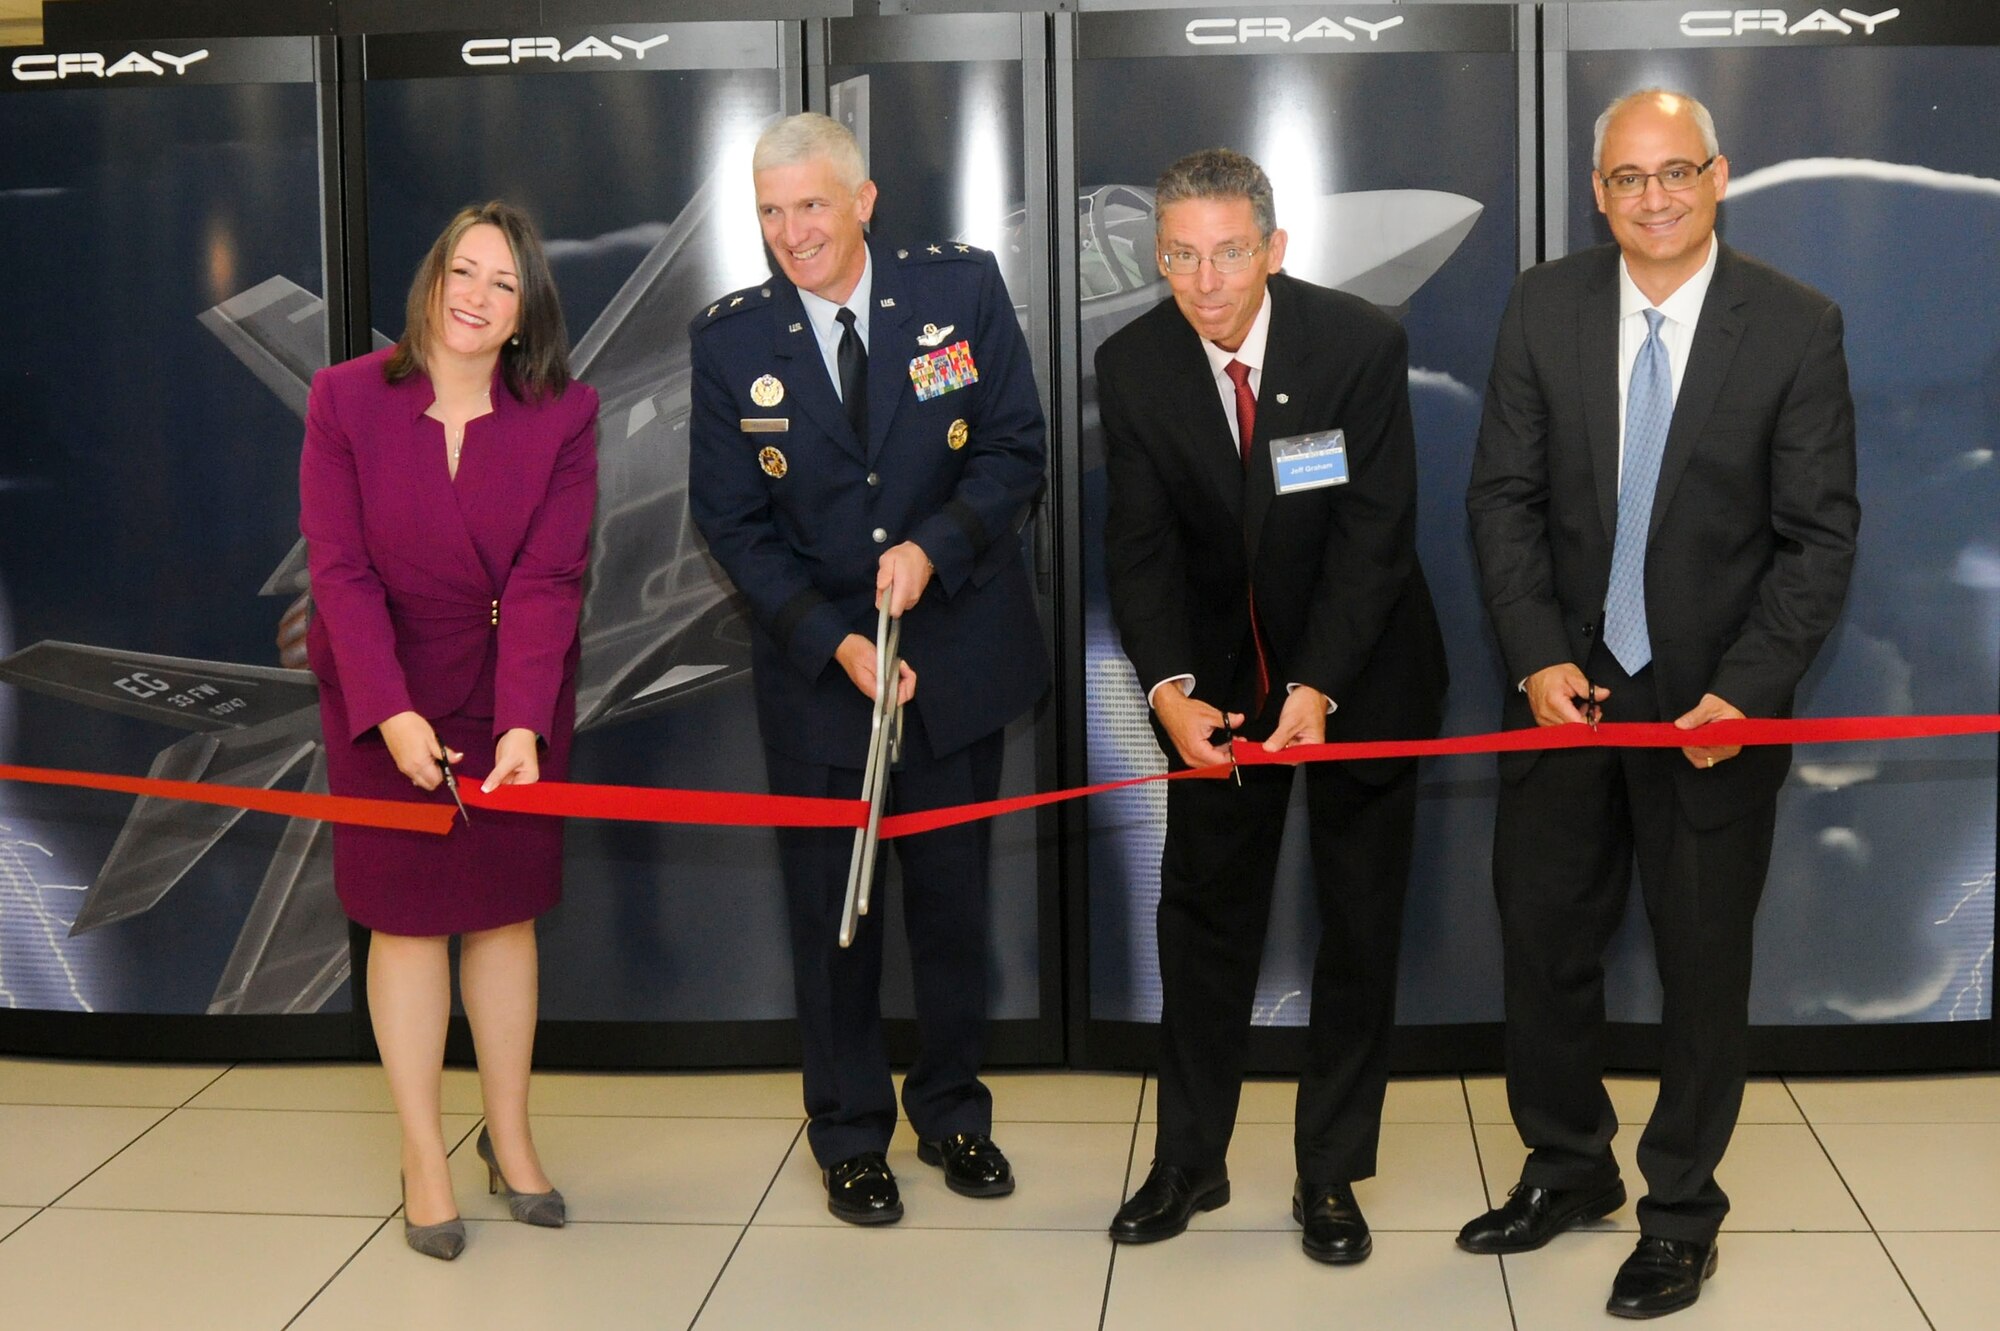 From left: Ms. Christine Cuicchi, Associate Director for DoD High Performance Computing Centers, AFRL commander Maj. Gen. Thomas Masiello, Mr. Jeff Graham, Chief of Air Force Research Laboratory's DoD Supercomputing Resource Center, and Mr. Peter Ungaro, CEO Cray Inc. cut the ribbon in a ceremony unveiling the new Lightning supercomputer. (U.S. Air Force photo by Wesley Farnsworth)